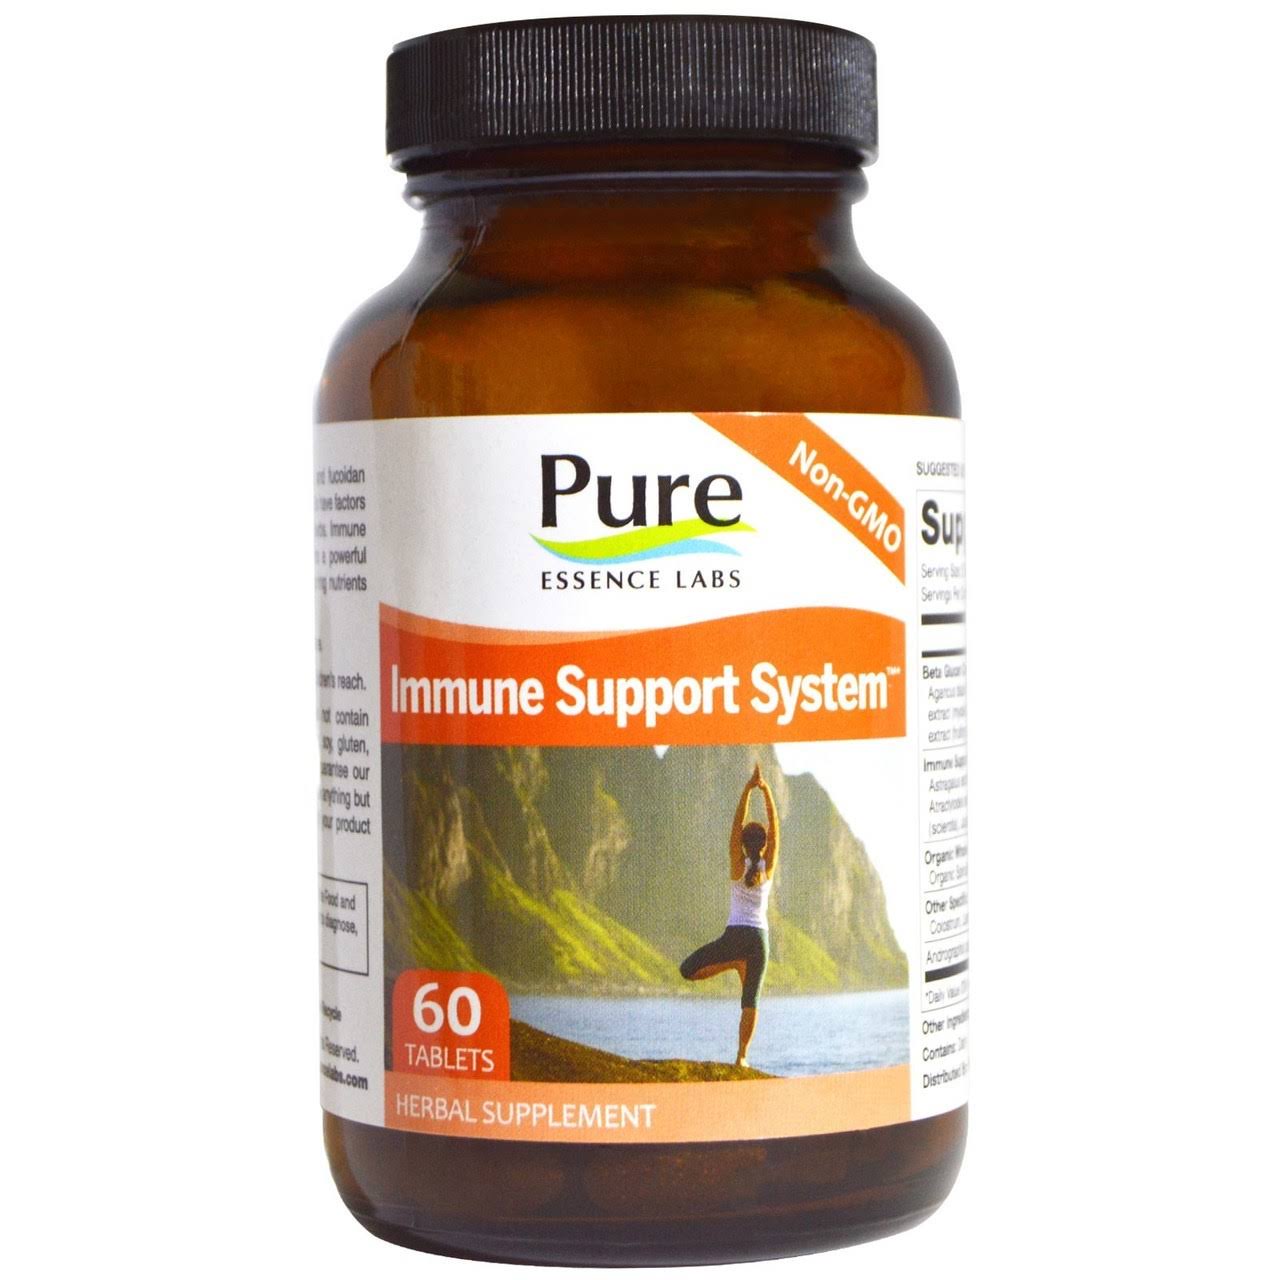 Pure Essence Labs Immune Support System Supplement - 60 Tablets